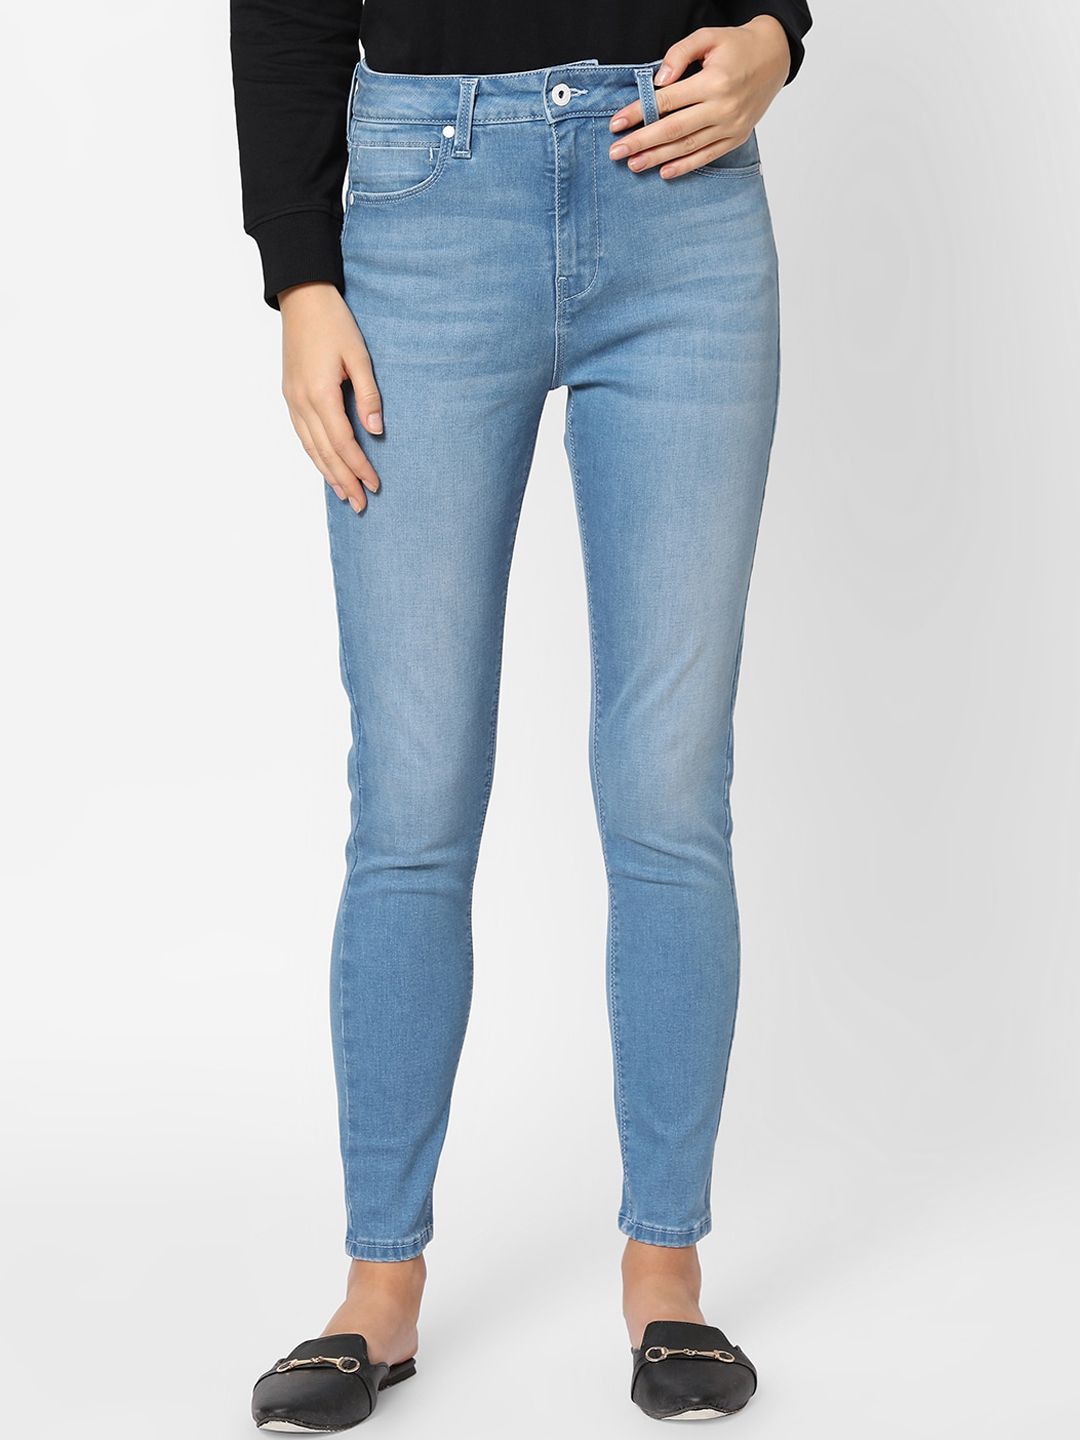 Pepe Jeans Women Blue Skinny Fit High-Rise Light Fade Jeans Price in India